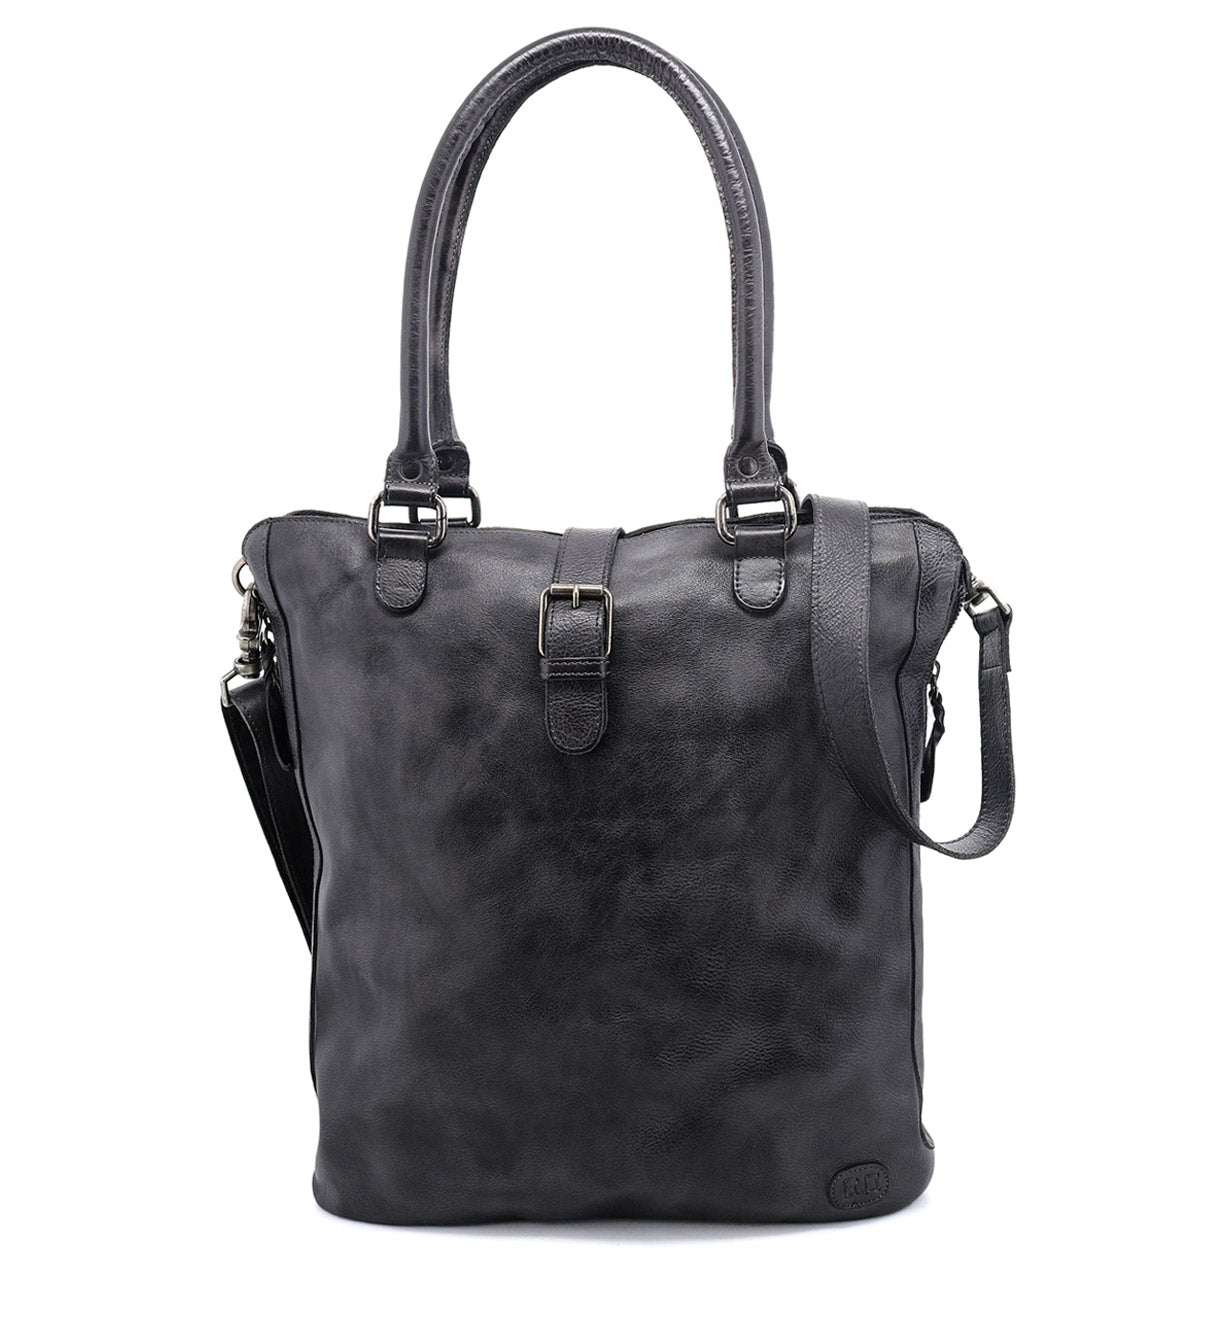 A Mildred black leather tote bag with a shoulder strap by Bed Stu.